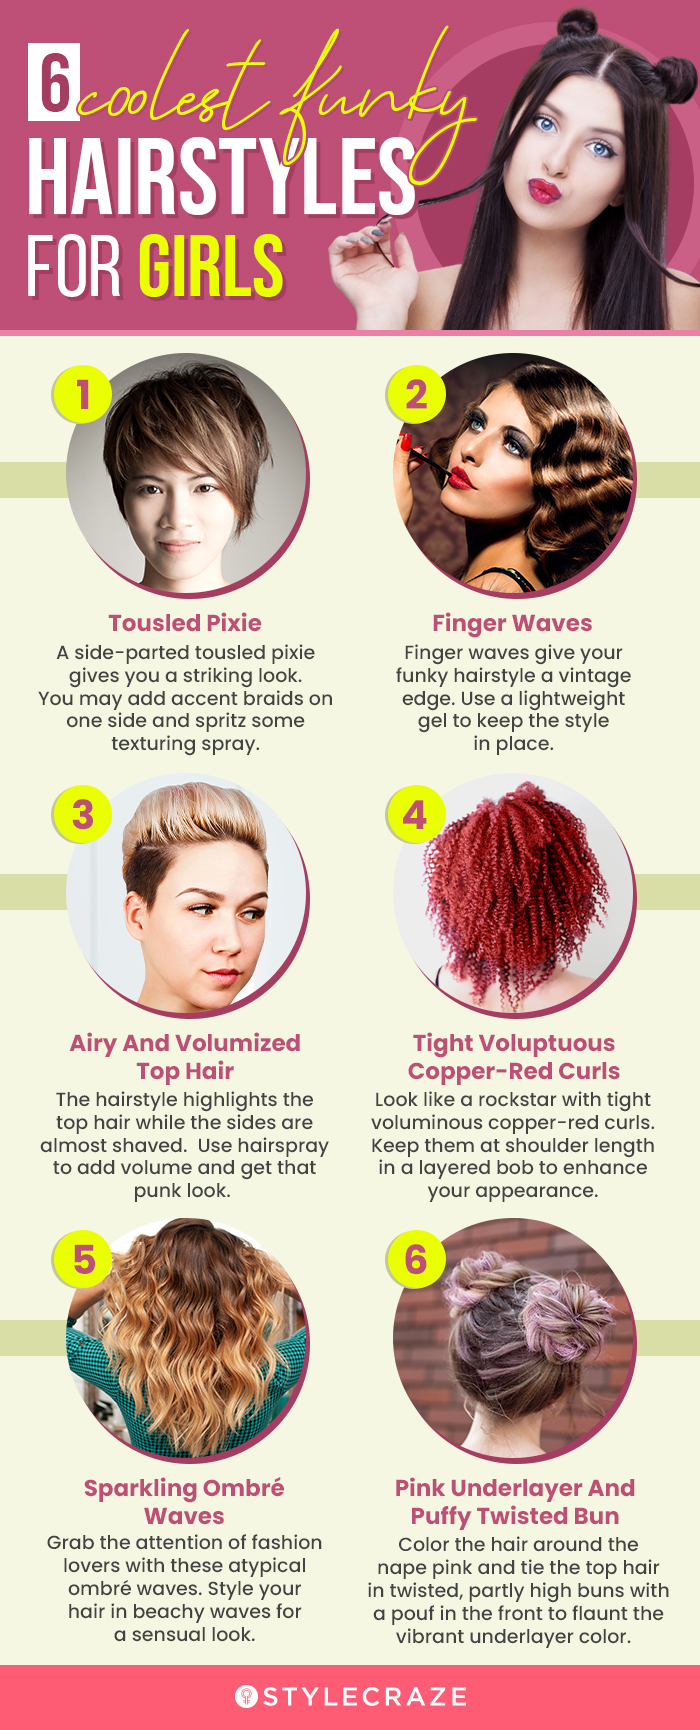 20 Hair Color Ideas for Short Hair to Refresh Your Style